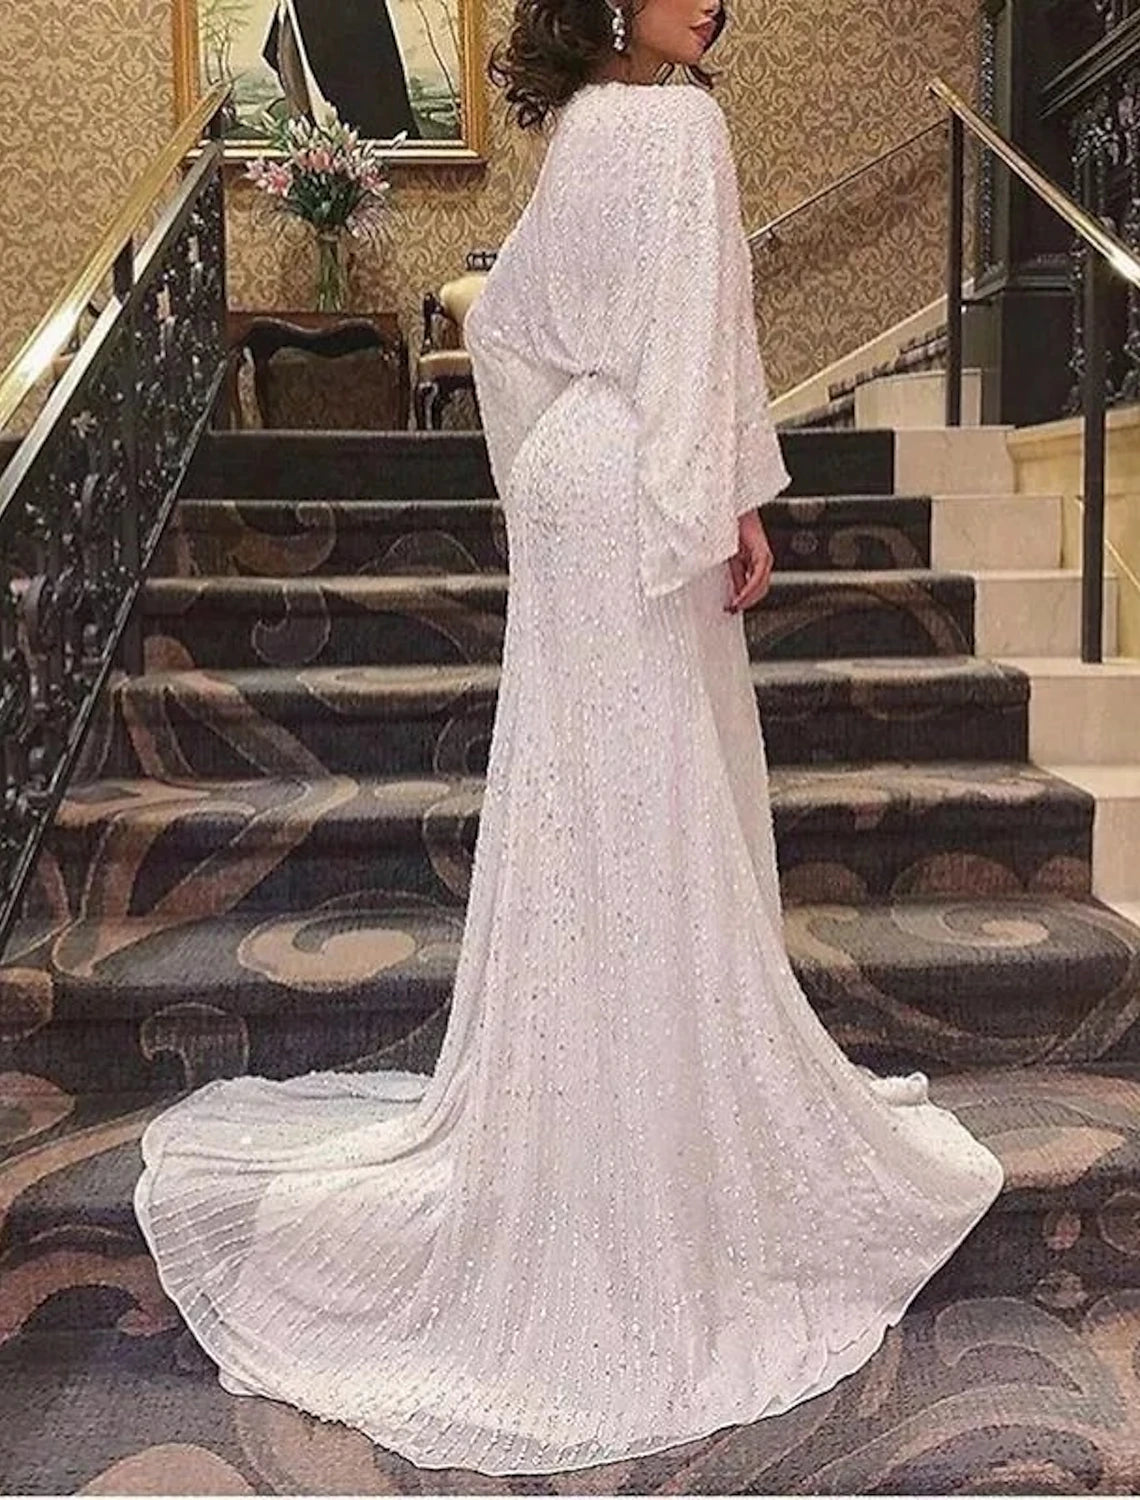 Sheath / Column Mother of the Bride Dress Simple Sparkle & Shine Plunging Neck Court Train Sequined Long Sleeve with Solid Color